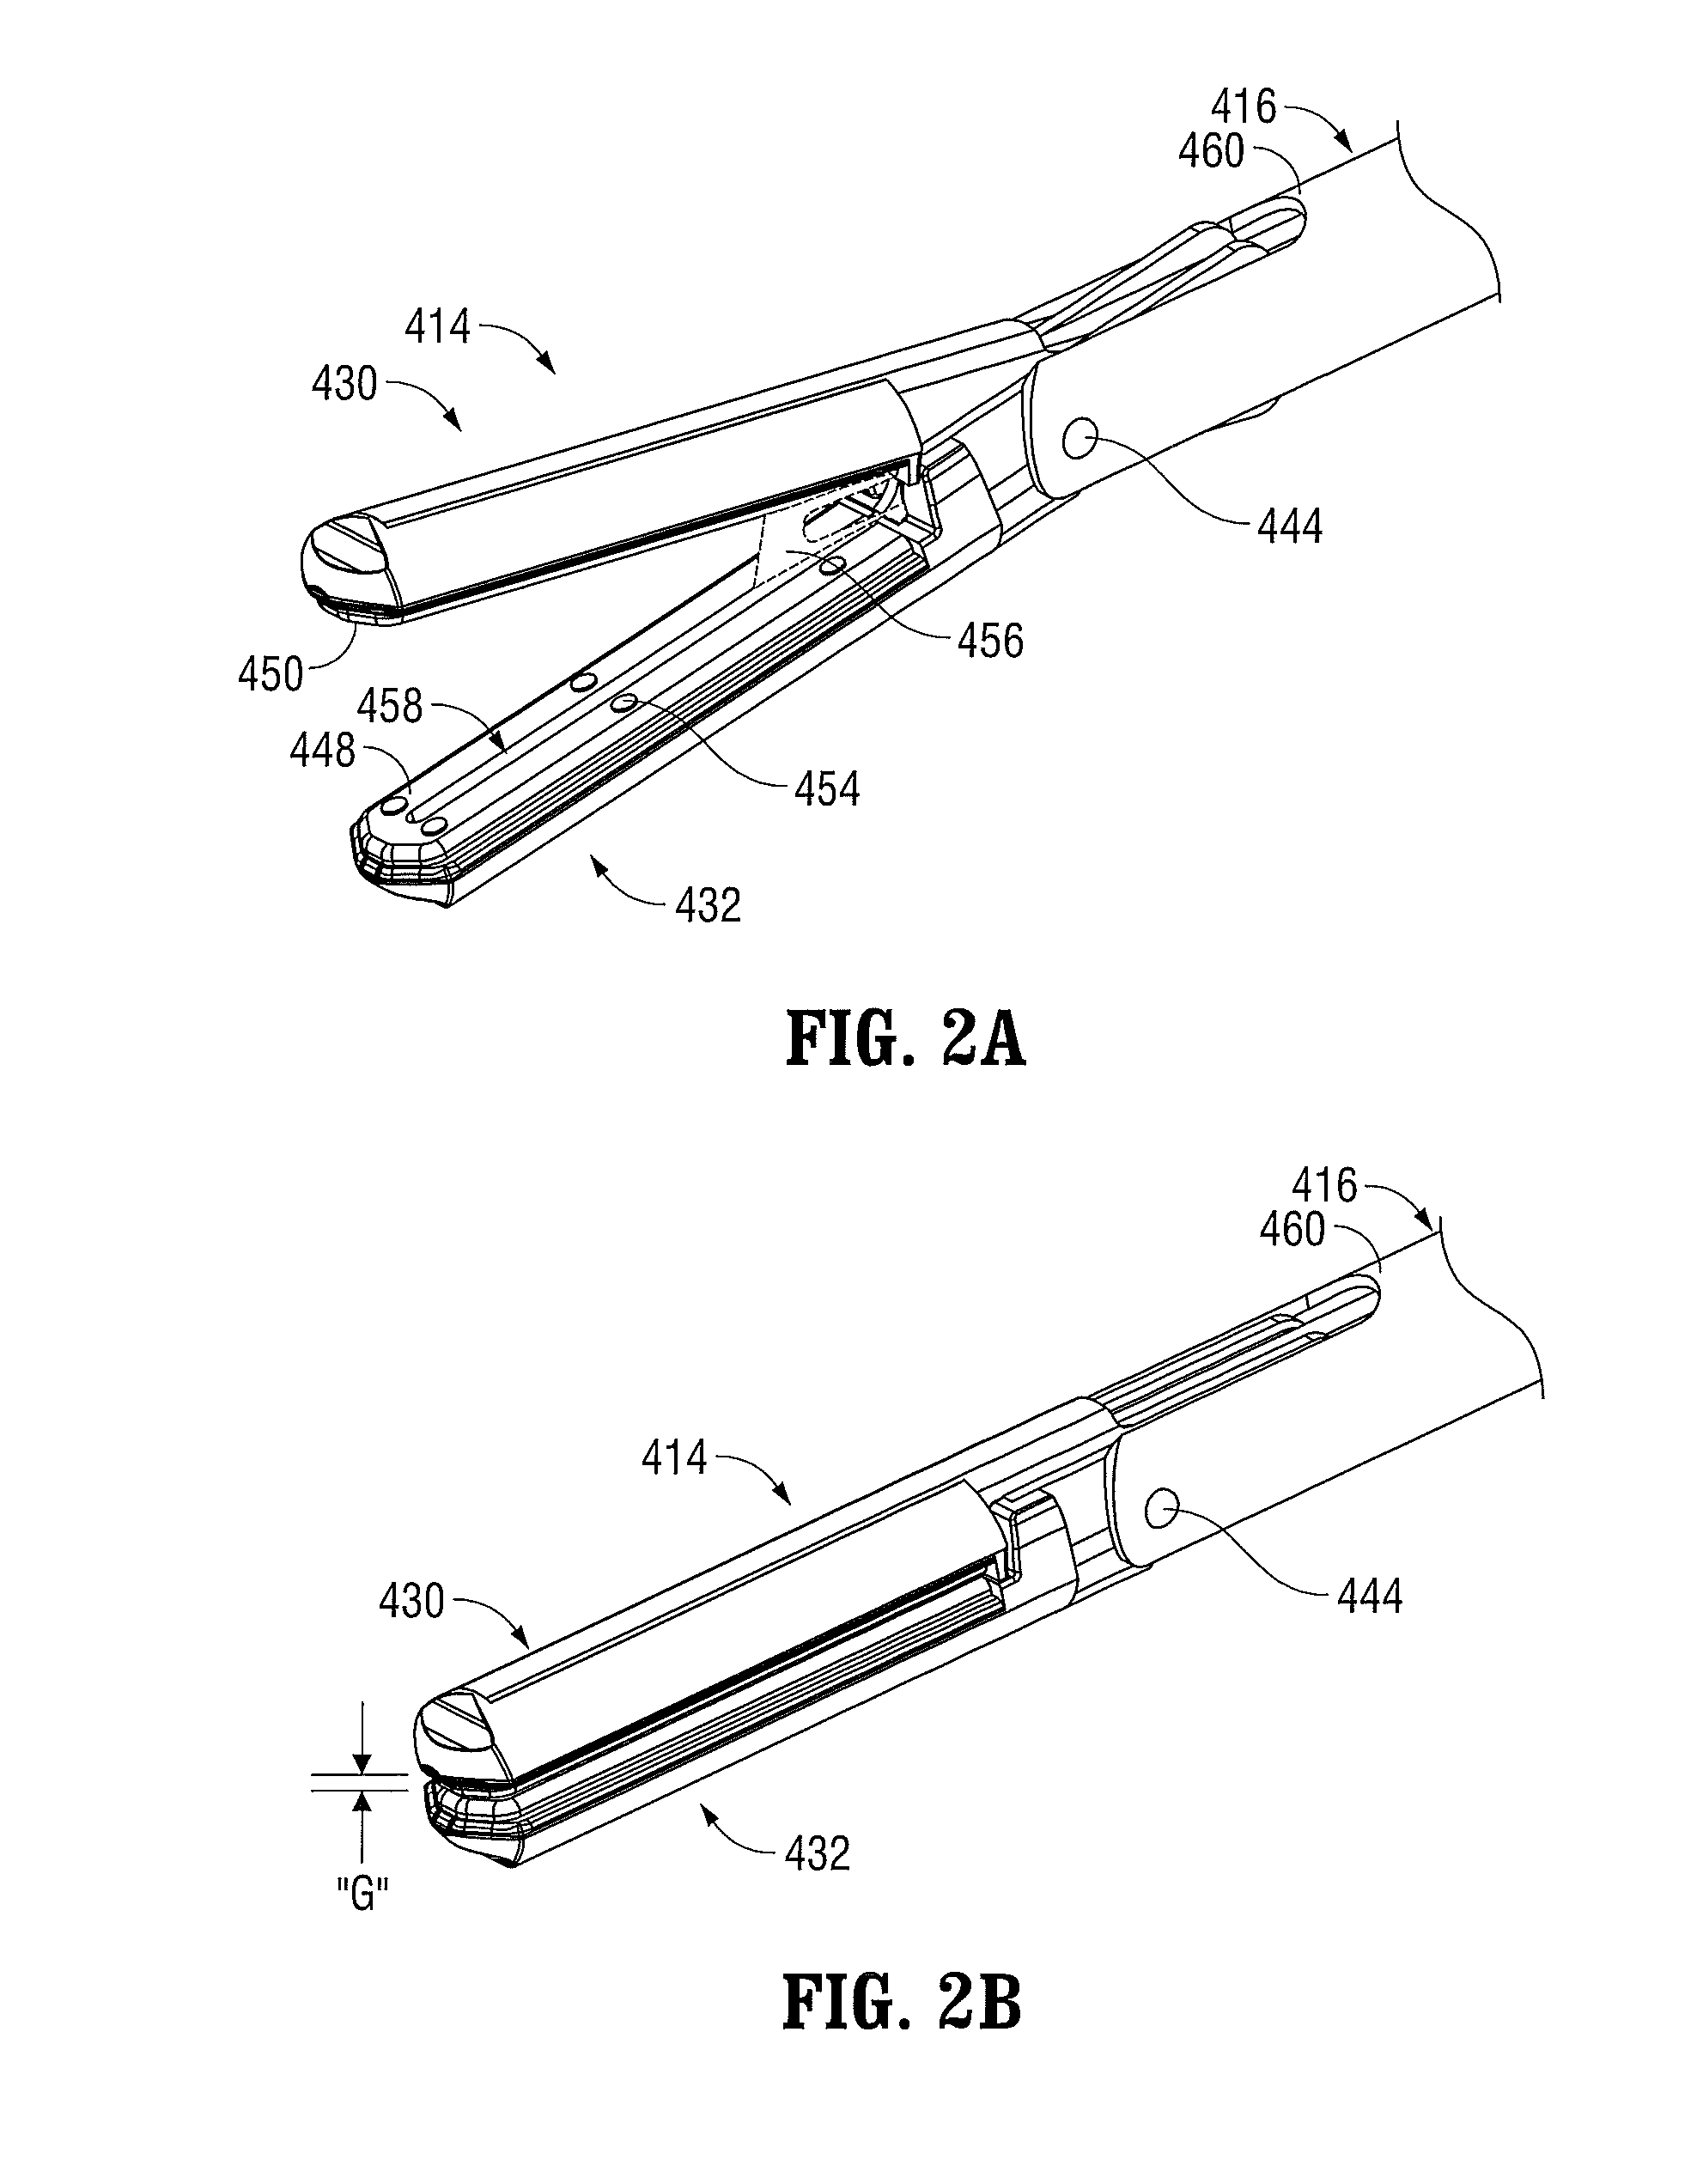 Simplified spring load mechanism for delivering shaft force of a surgical instrument